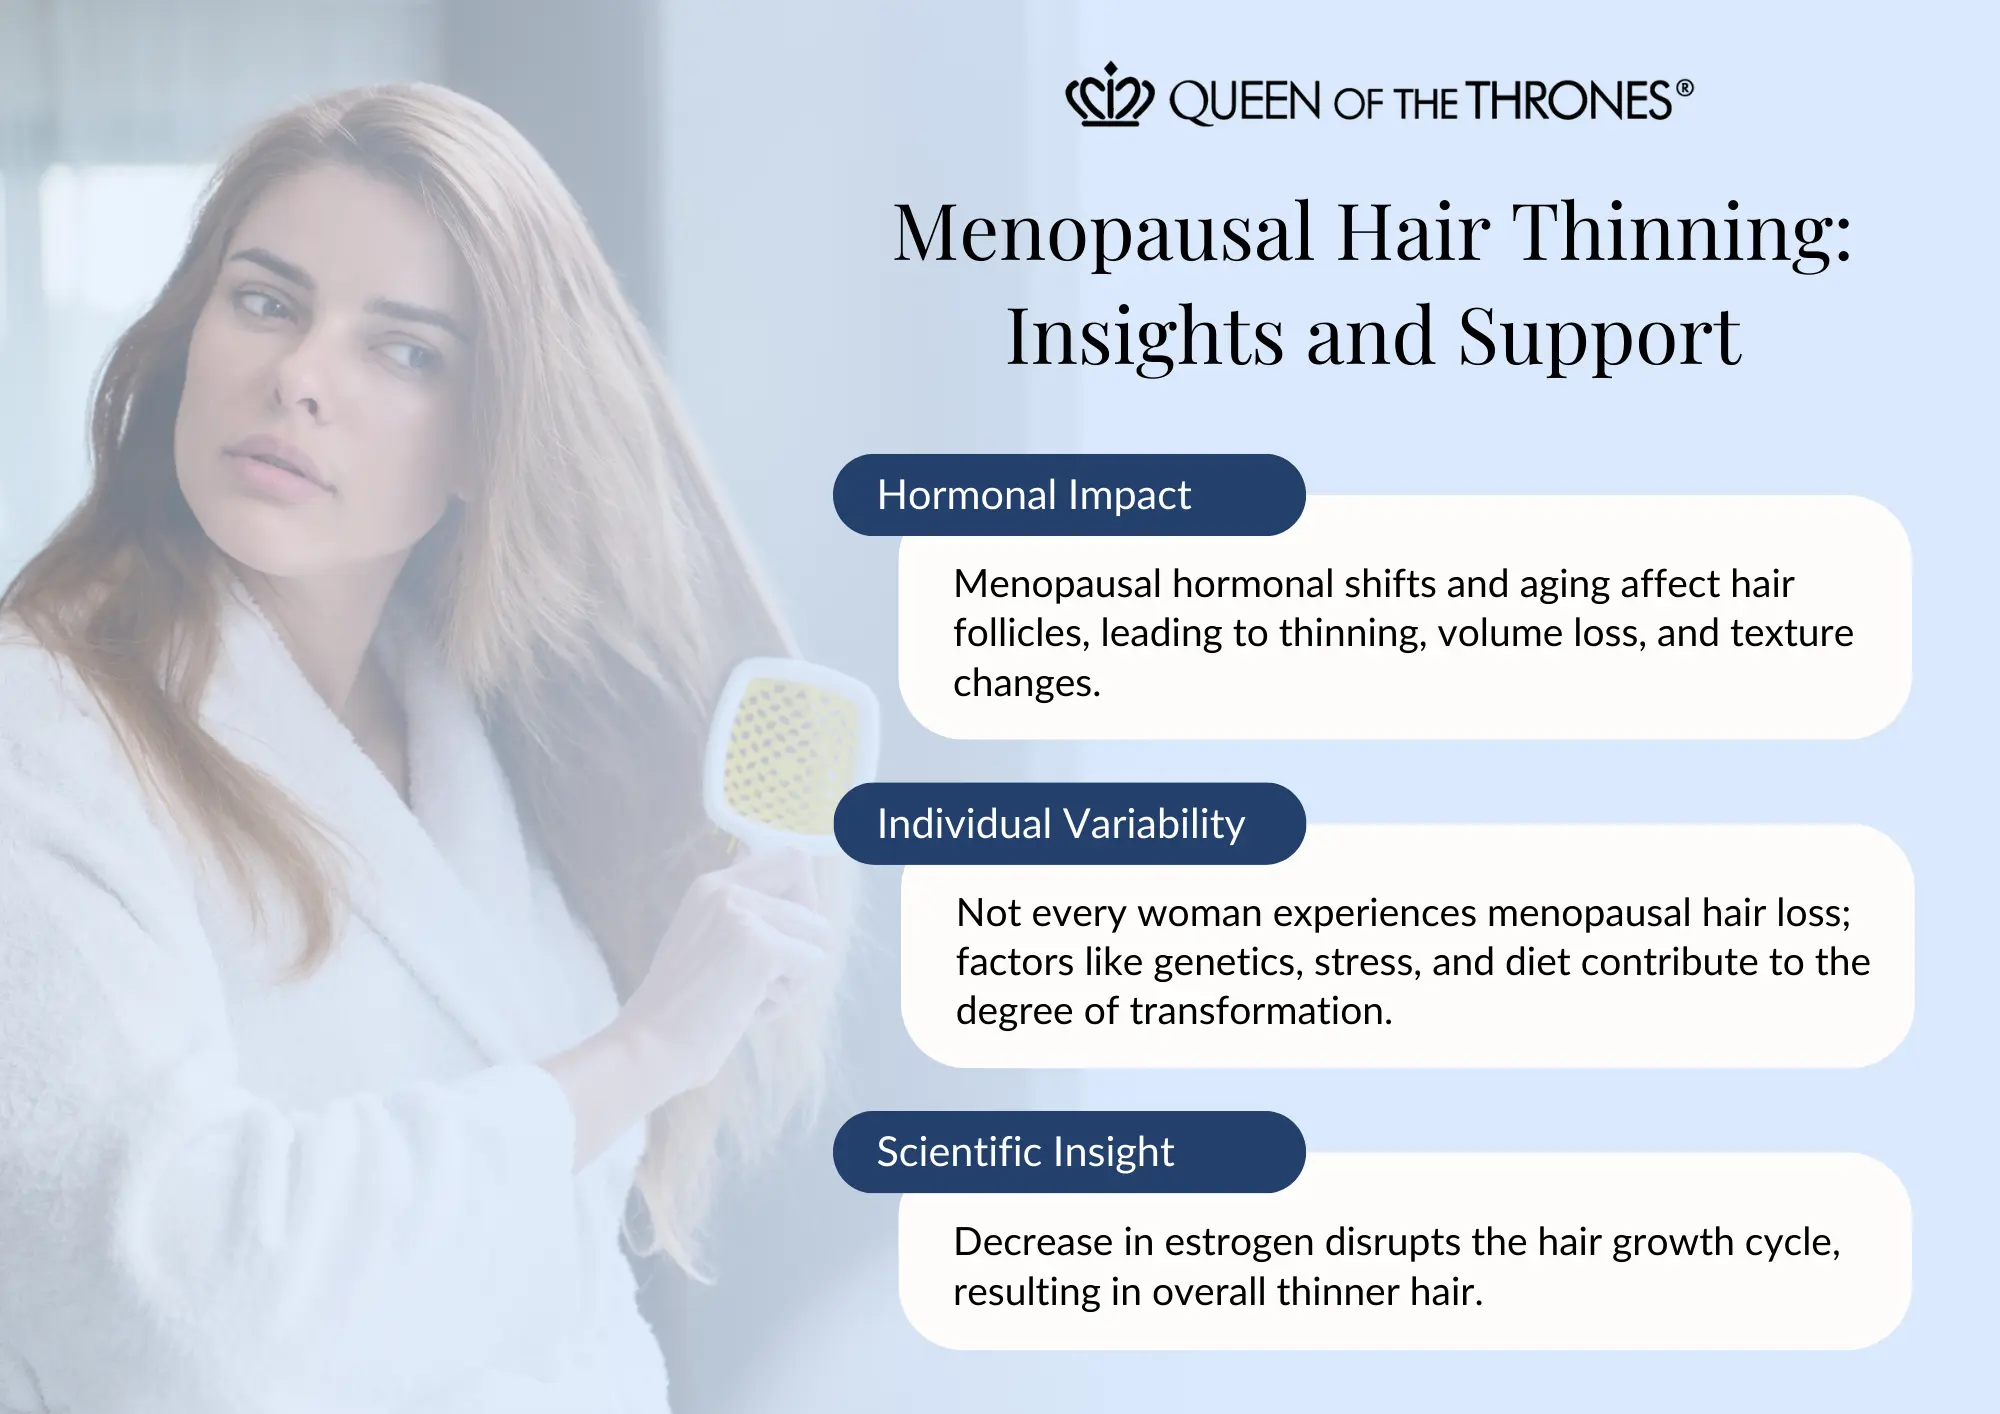 Queen of the Thrones menopausal hair thinning insights and support